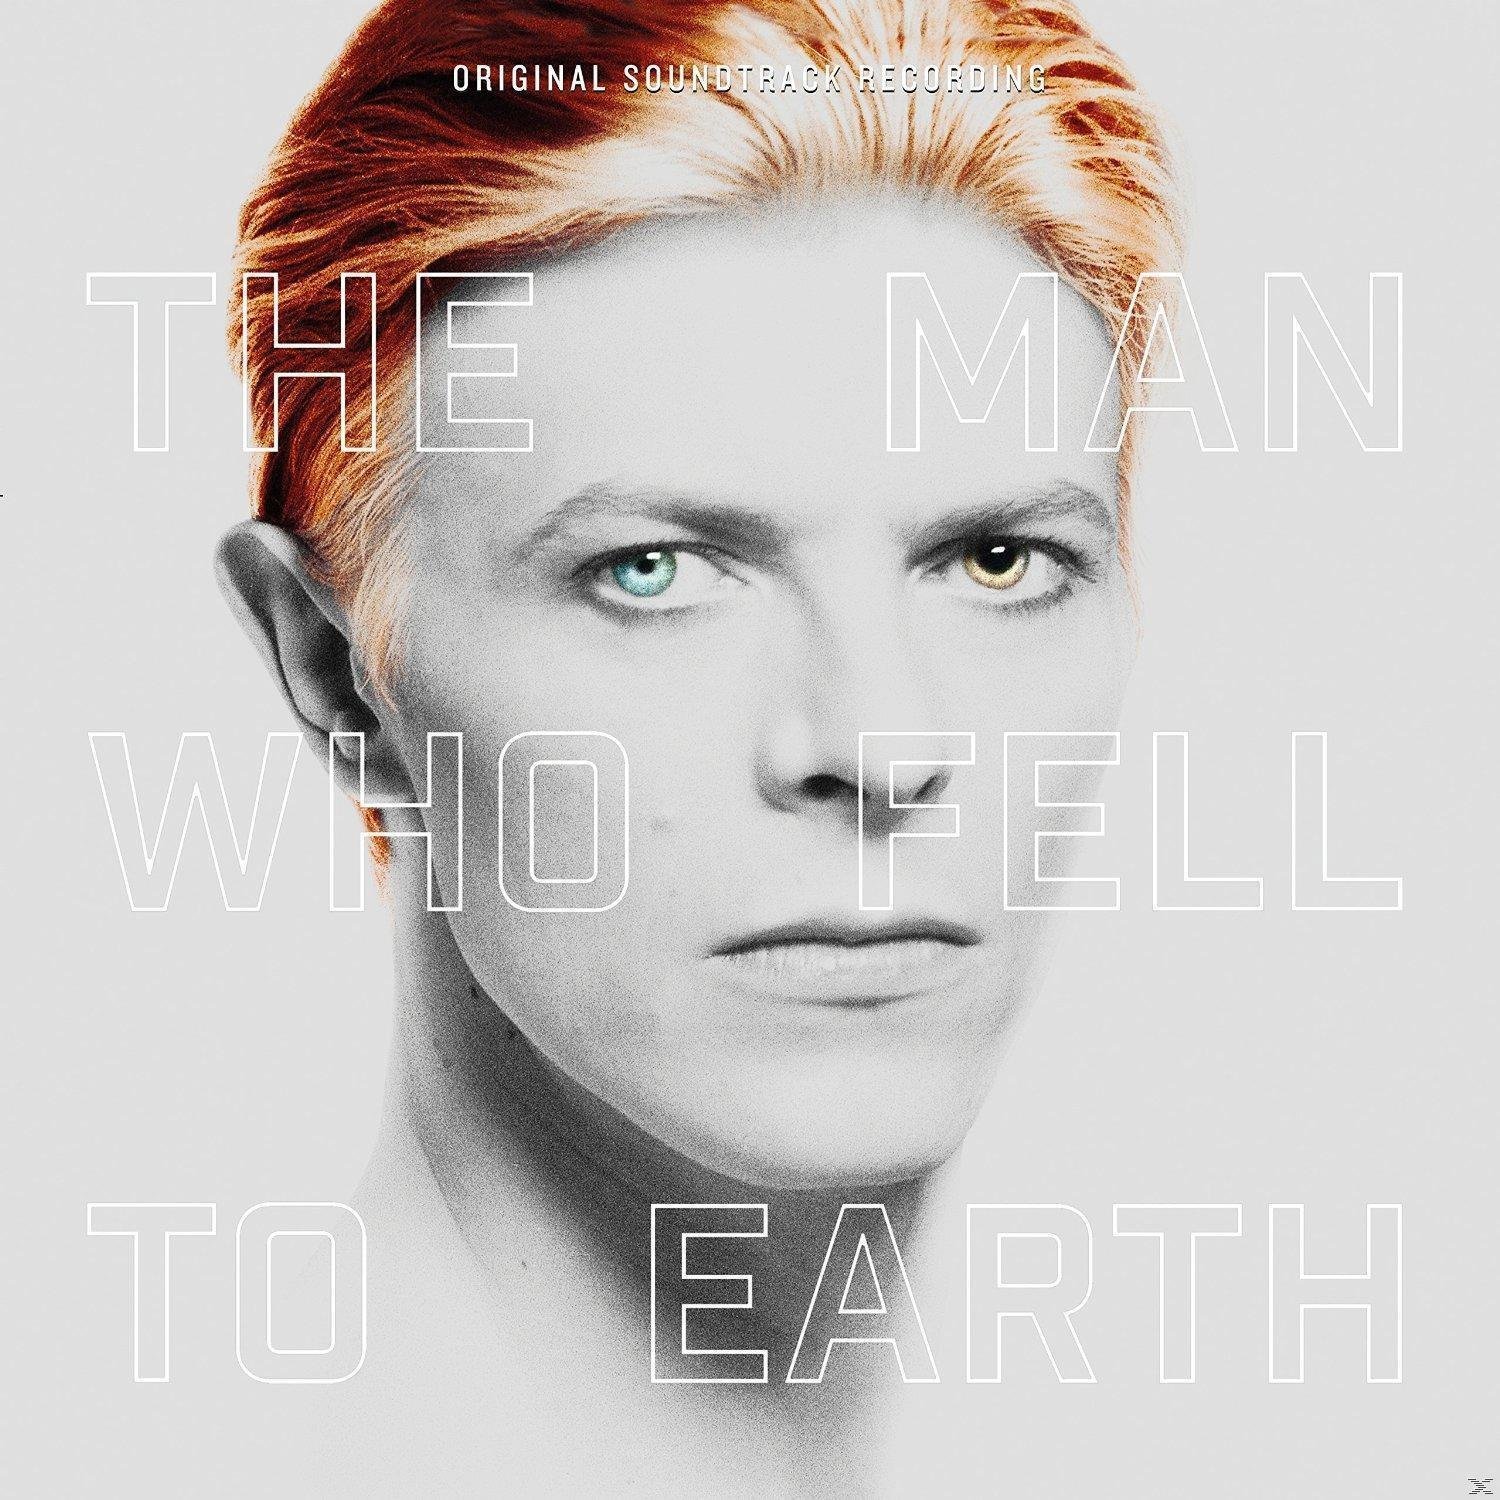 Hanglemez David Bowie - The Man Who Fell To Earth OST (Starring David Bowie) (2 LP + 2 CD)